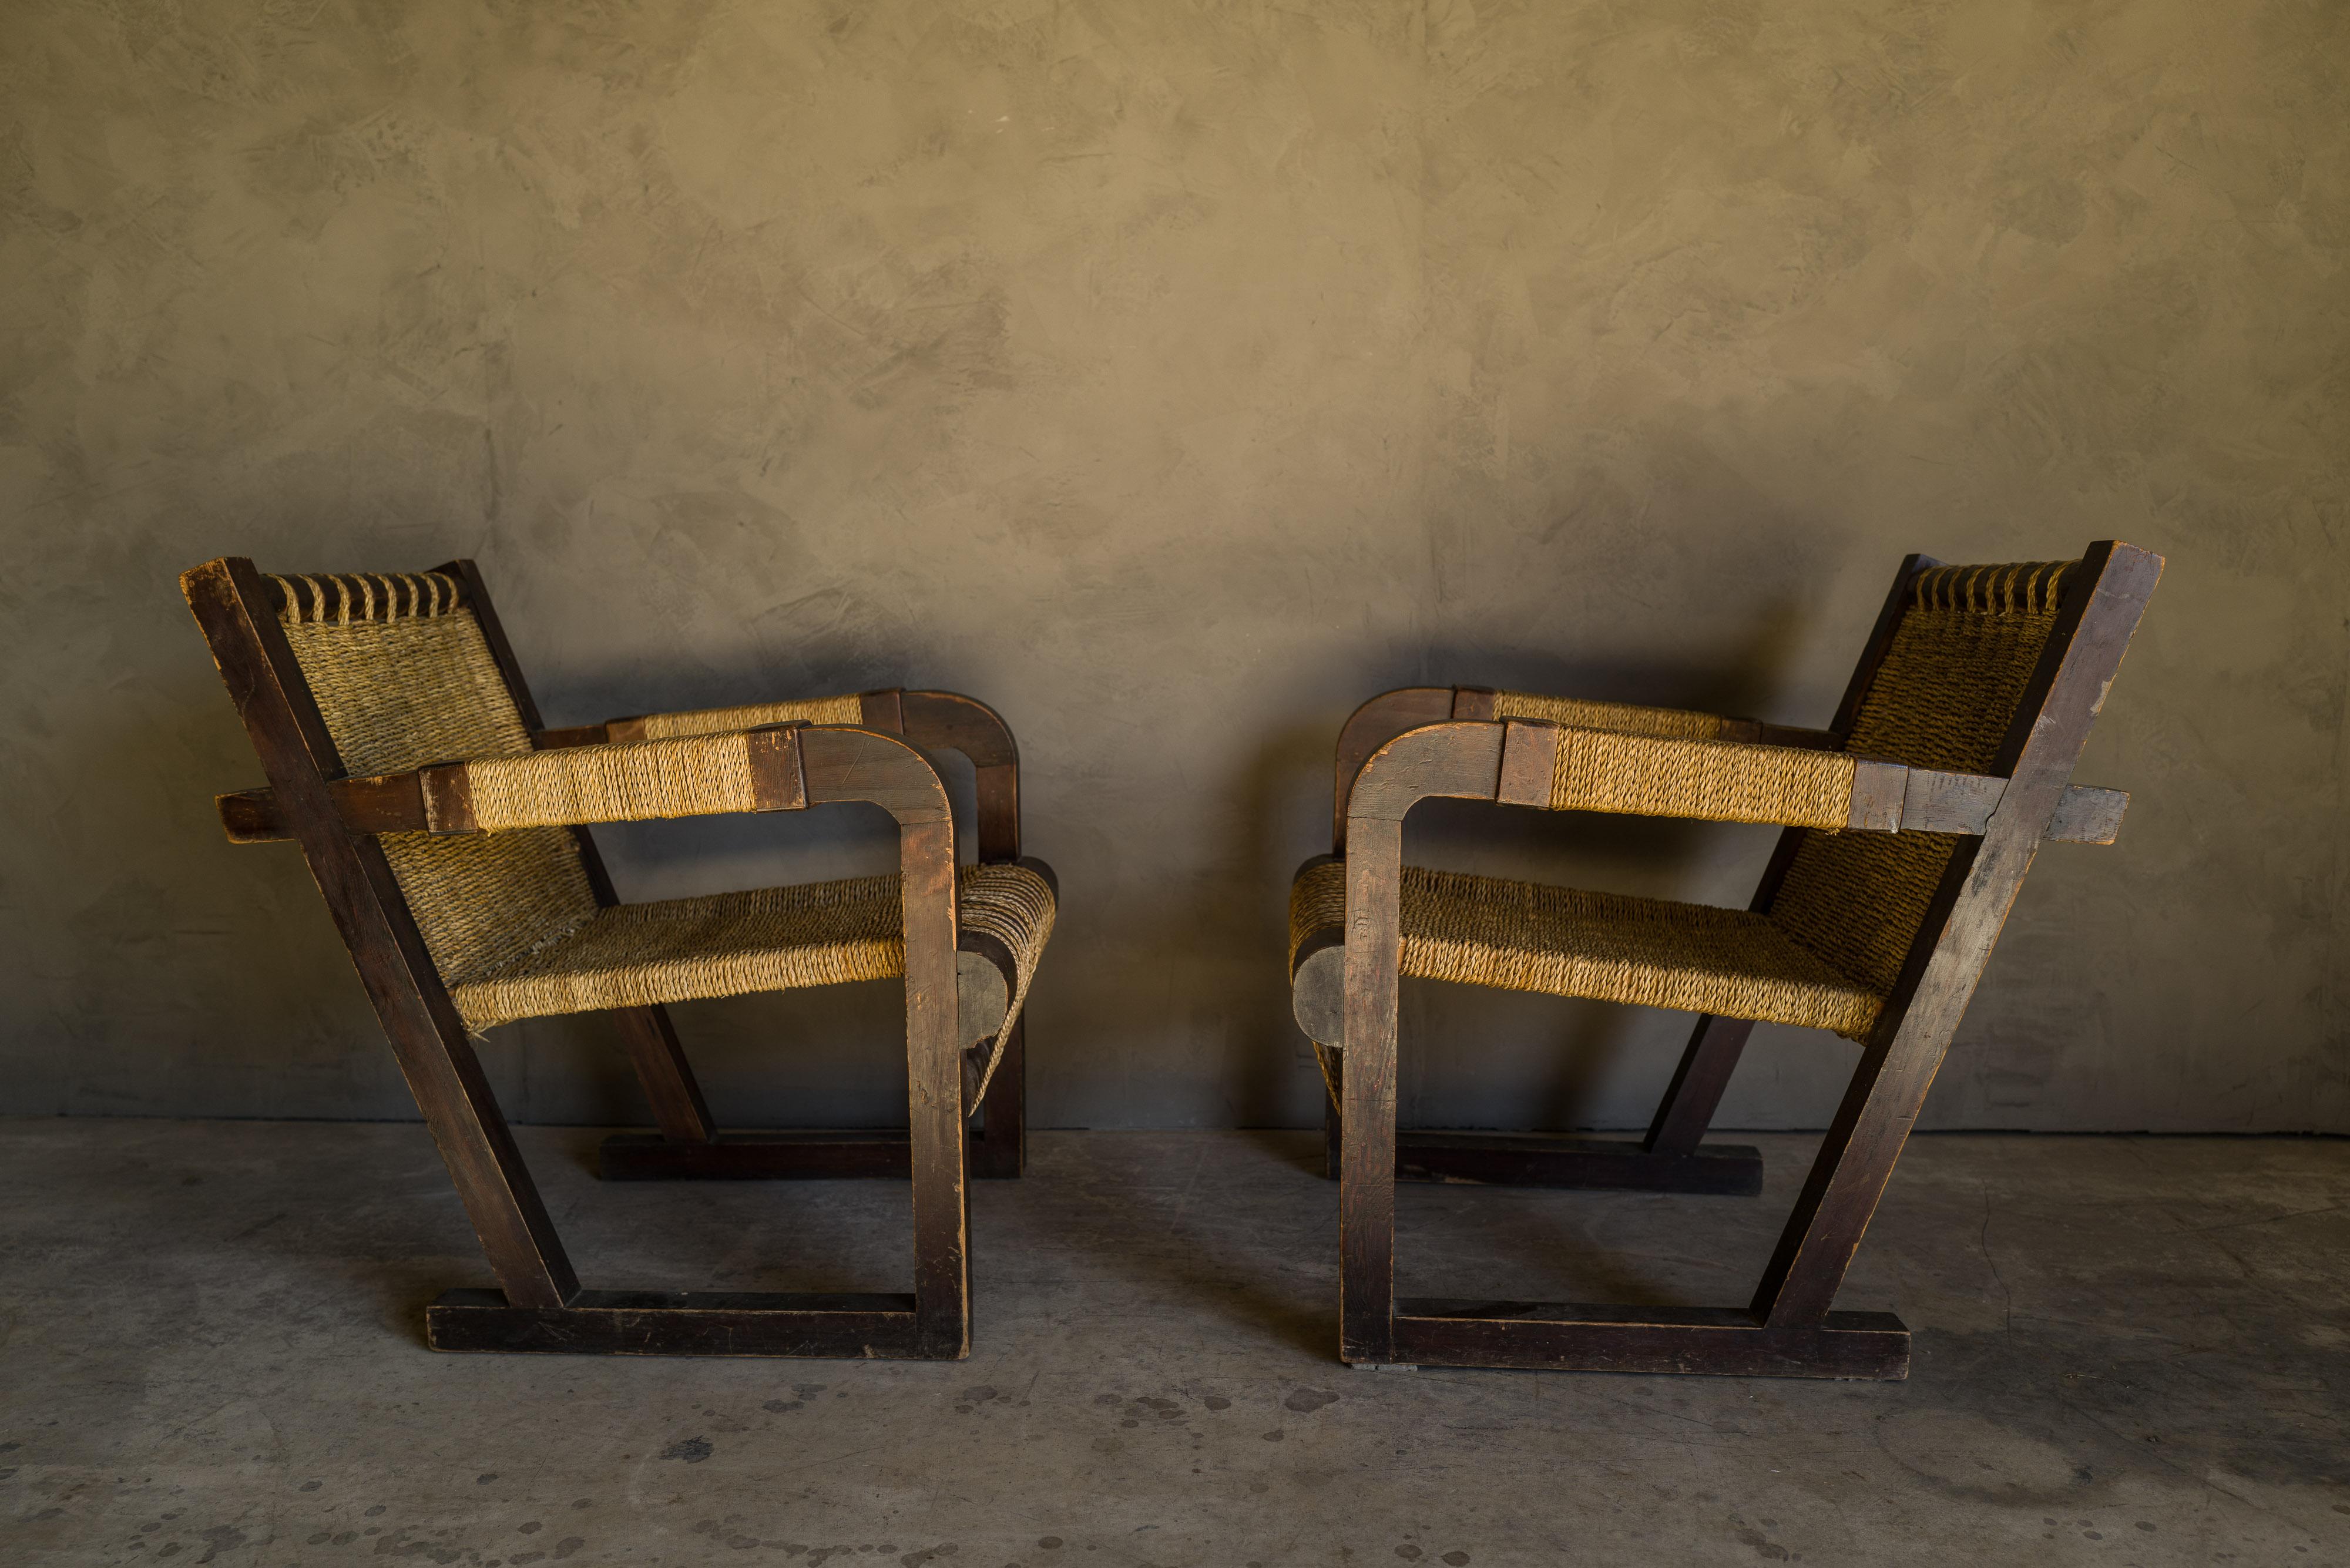 Mid-20th Century Rare Pair of Woven Lounge Chairs from France, circa 1960